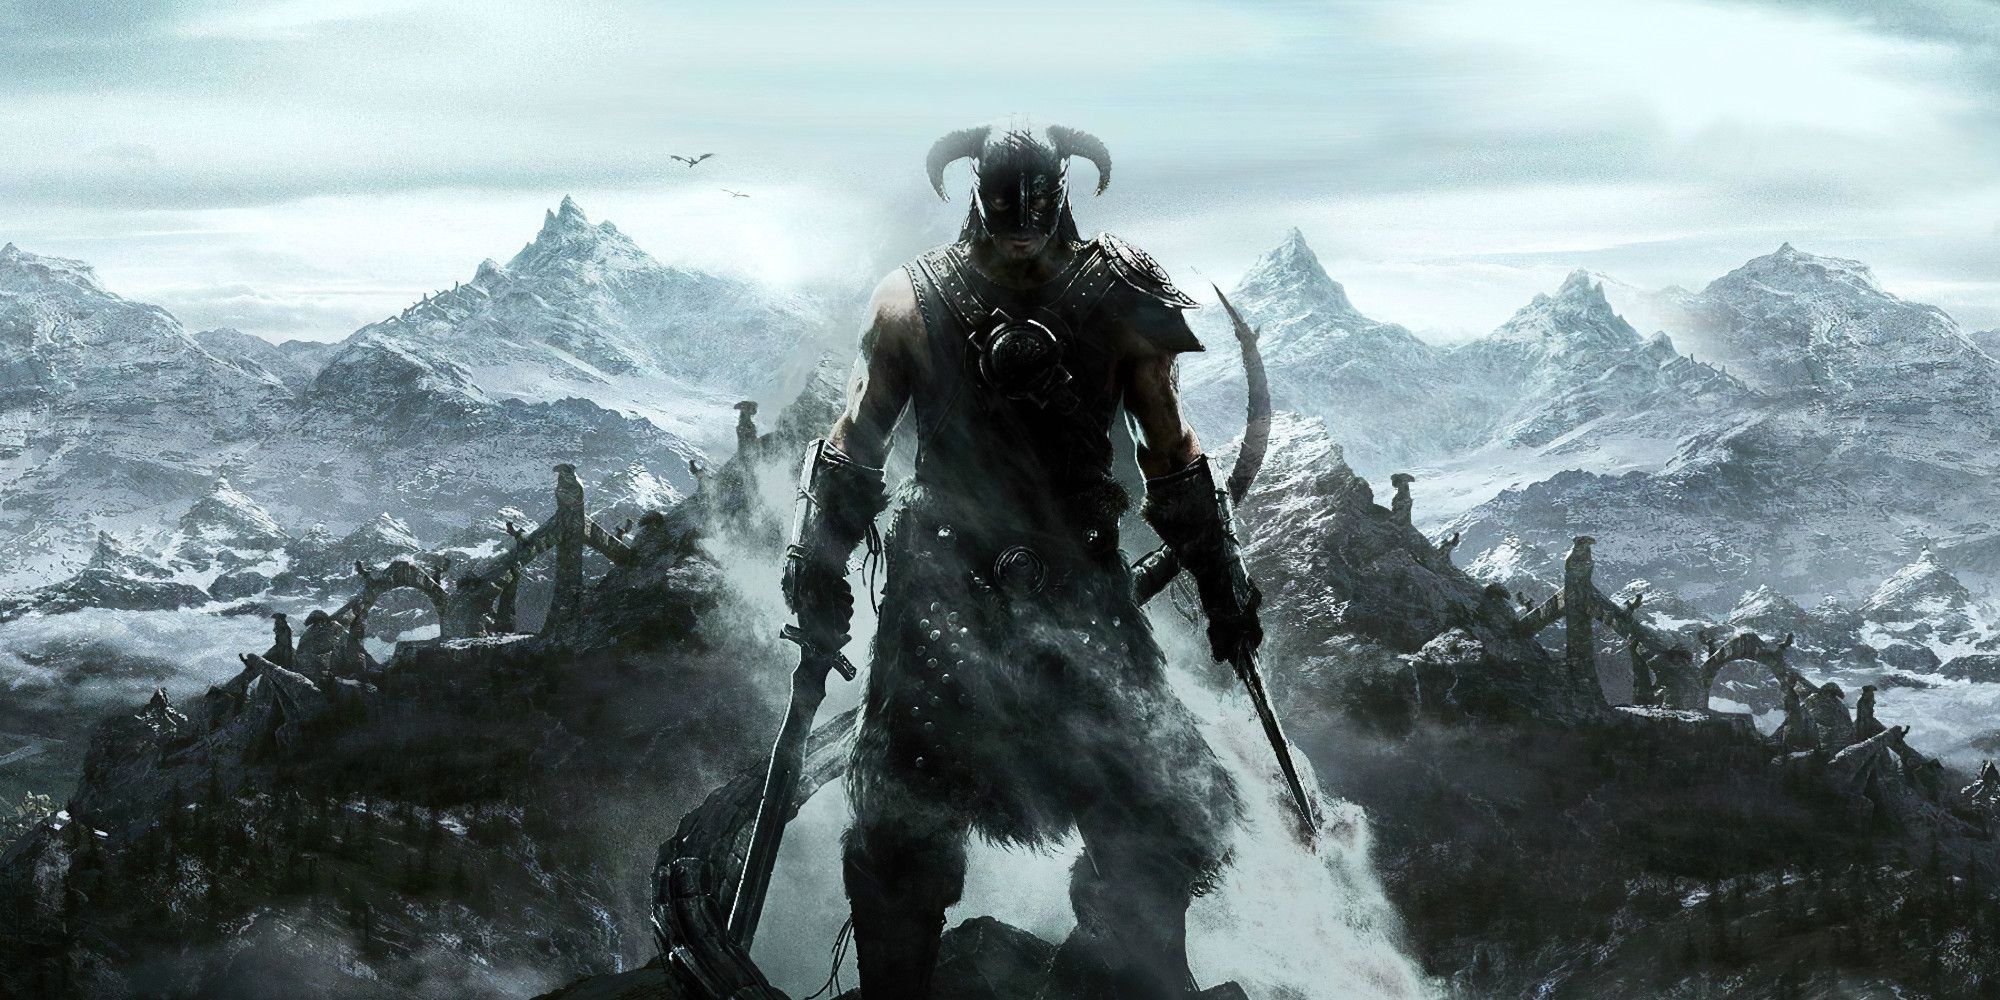 The dragonborn stands on a mountain in Skyrim